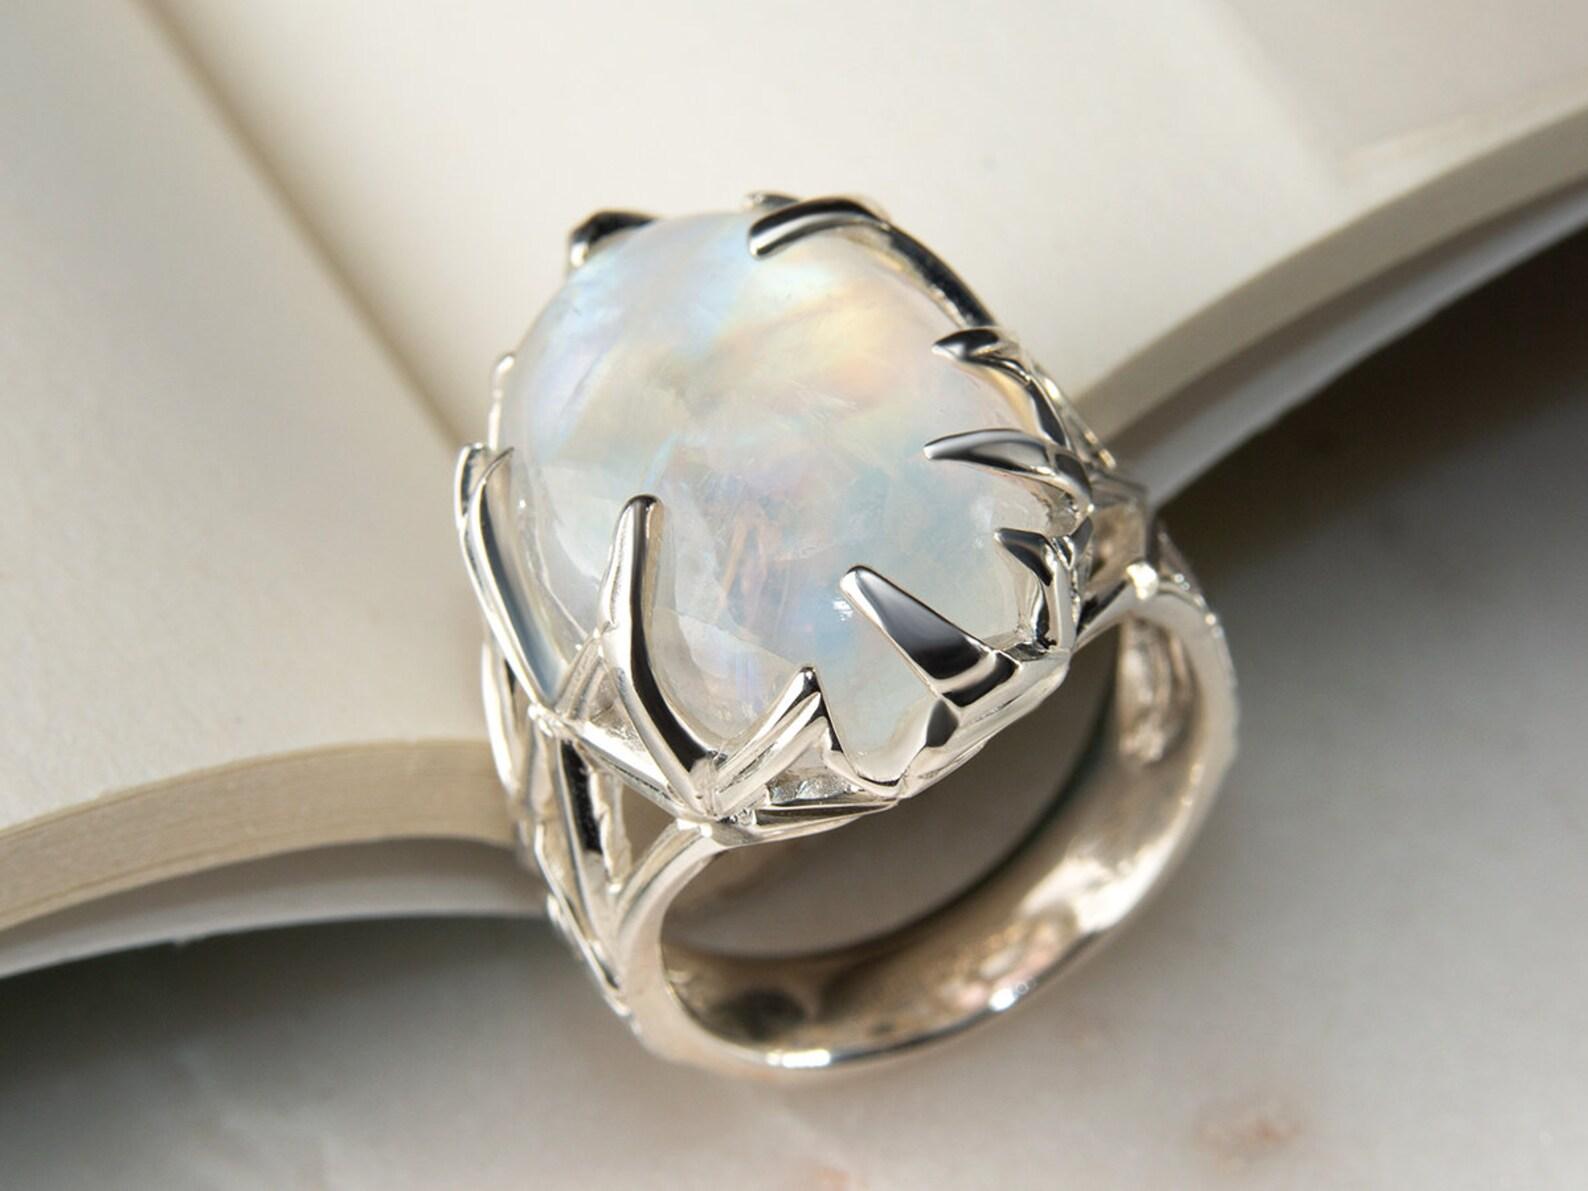 Big Moonstone Adularia Silver Ring Cabochon Translucent Pearly White Clear Stone In New Condition For Sale In Berlin, DE